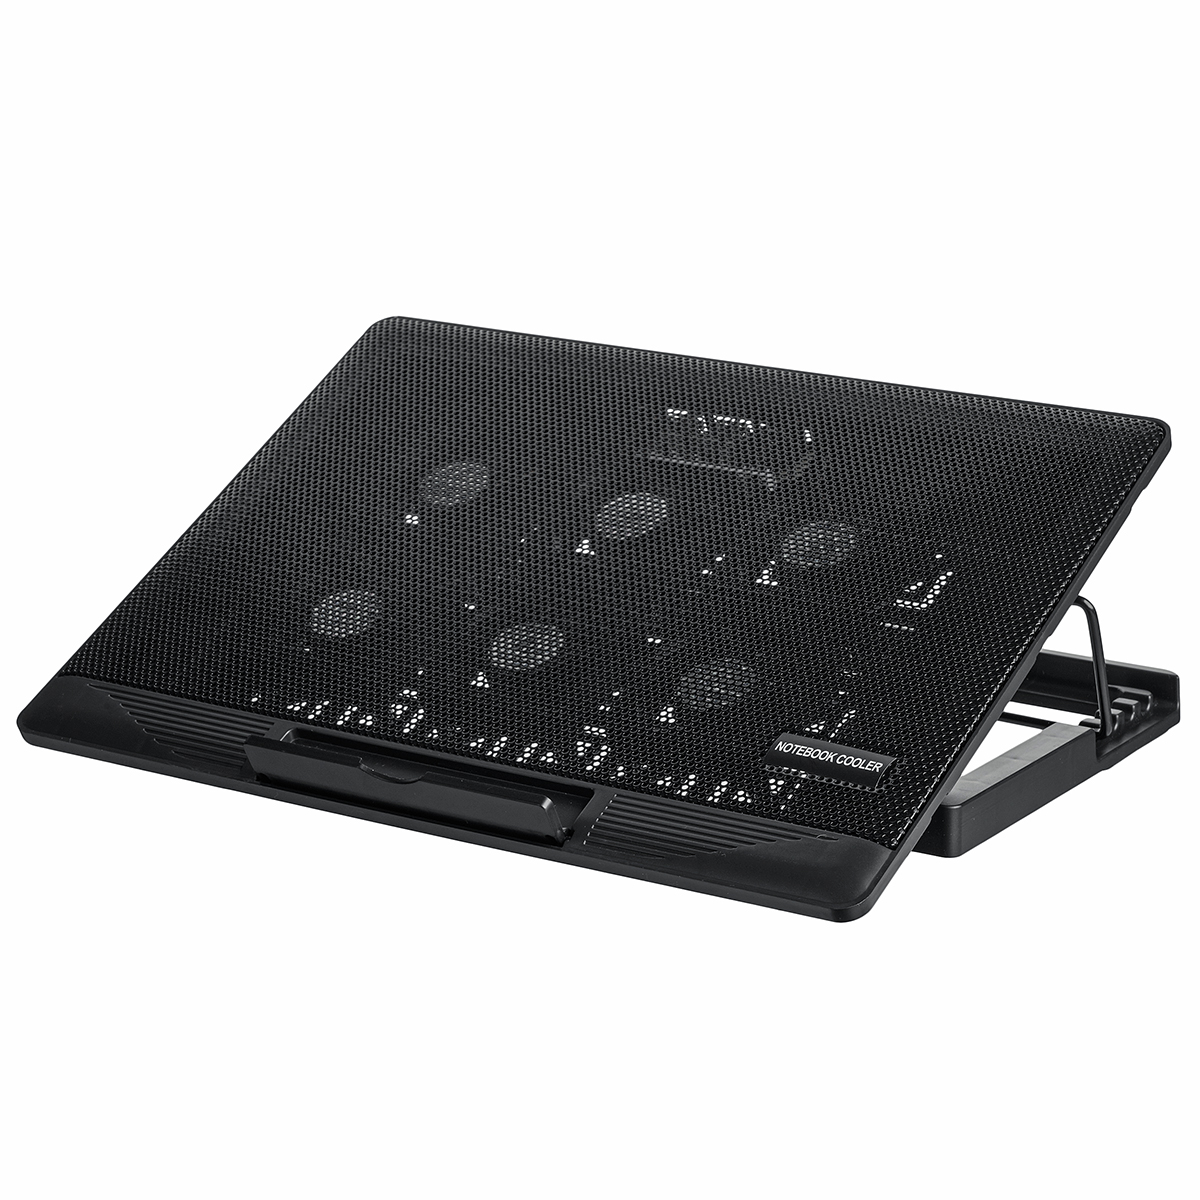 Find 6 Fan Adjustable Laptop Cooling Pad Cooler Portable Stand For 14-17inch Laptop for Sale on Gipsybee.com with cryptocurrencies